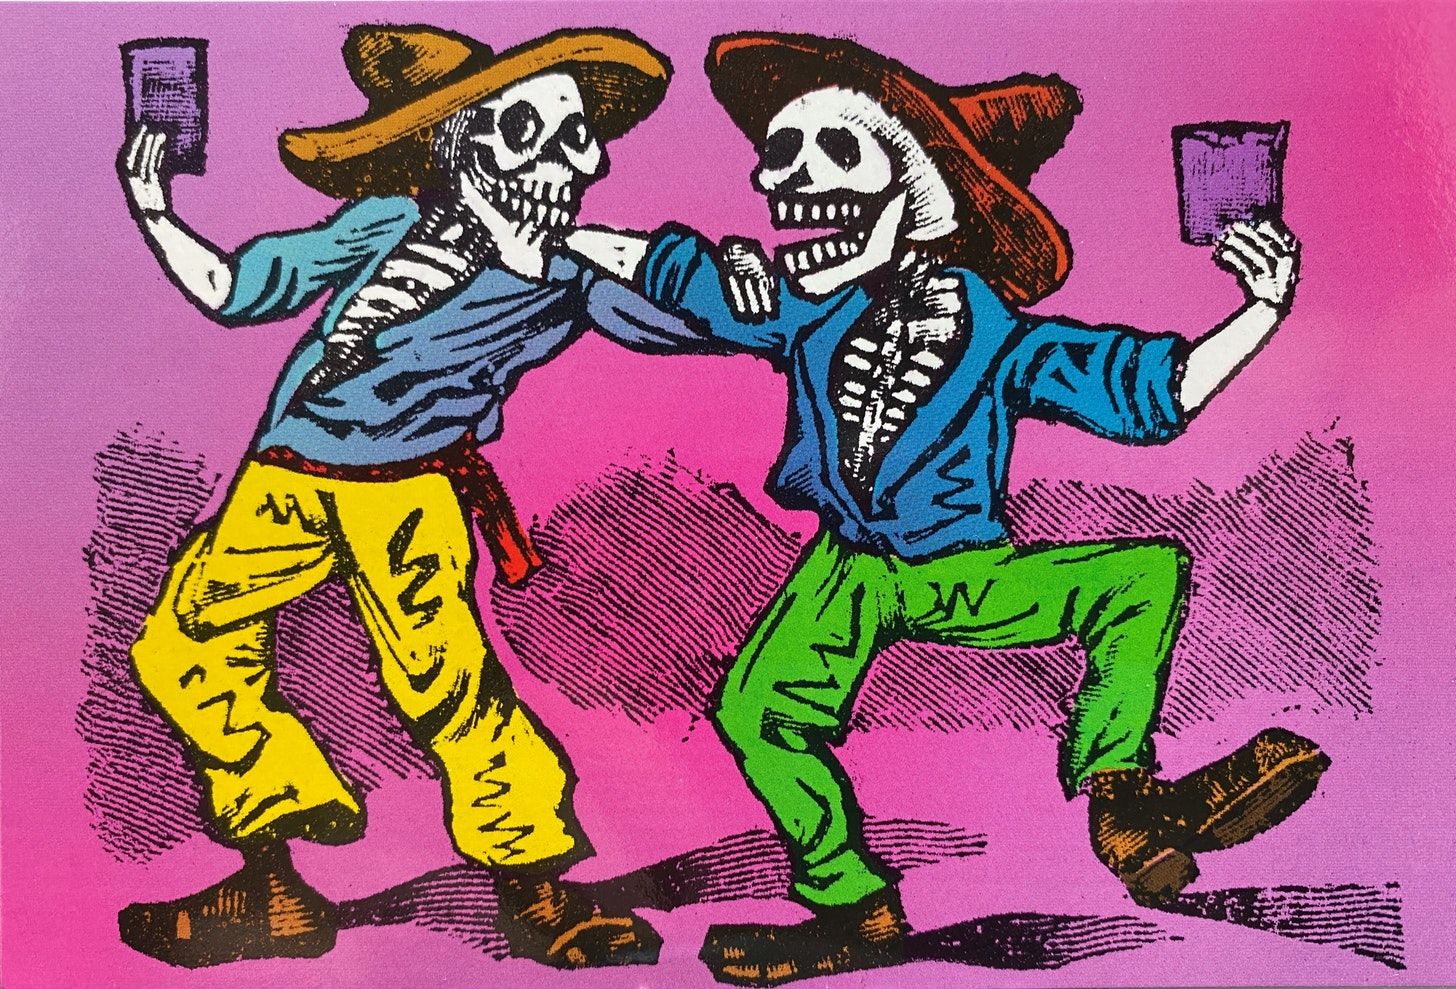 Two skeletons facing each other, both wearing sombreros, long-sleeved button-down shirts, pants and shoes. They are embracing each other with their left and right arm while holding a cup in their free hand.